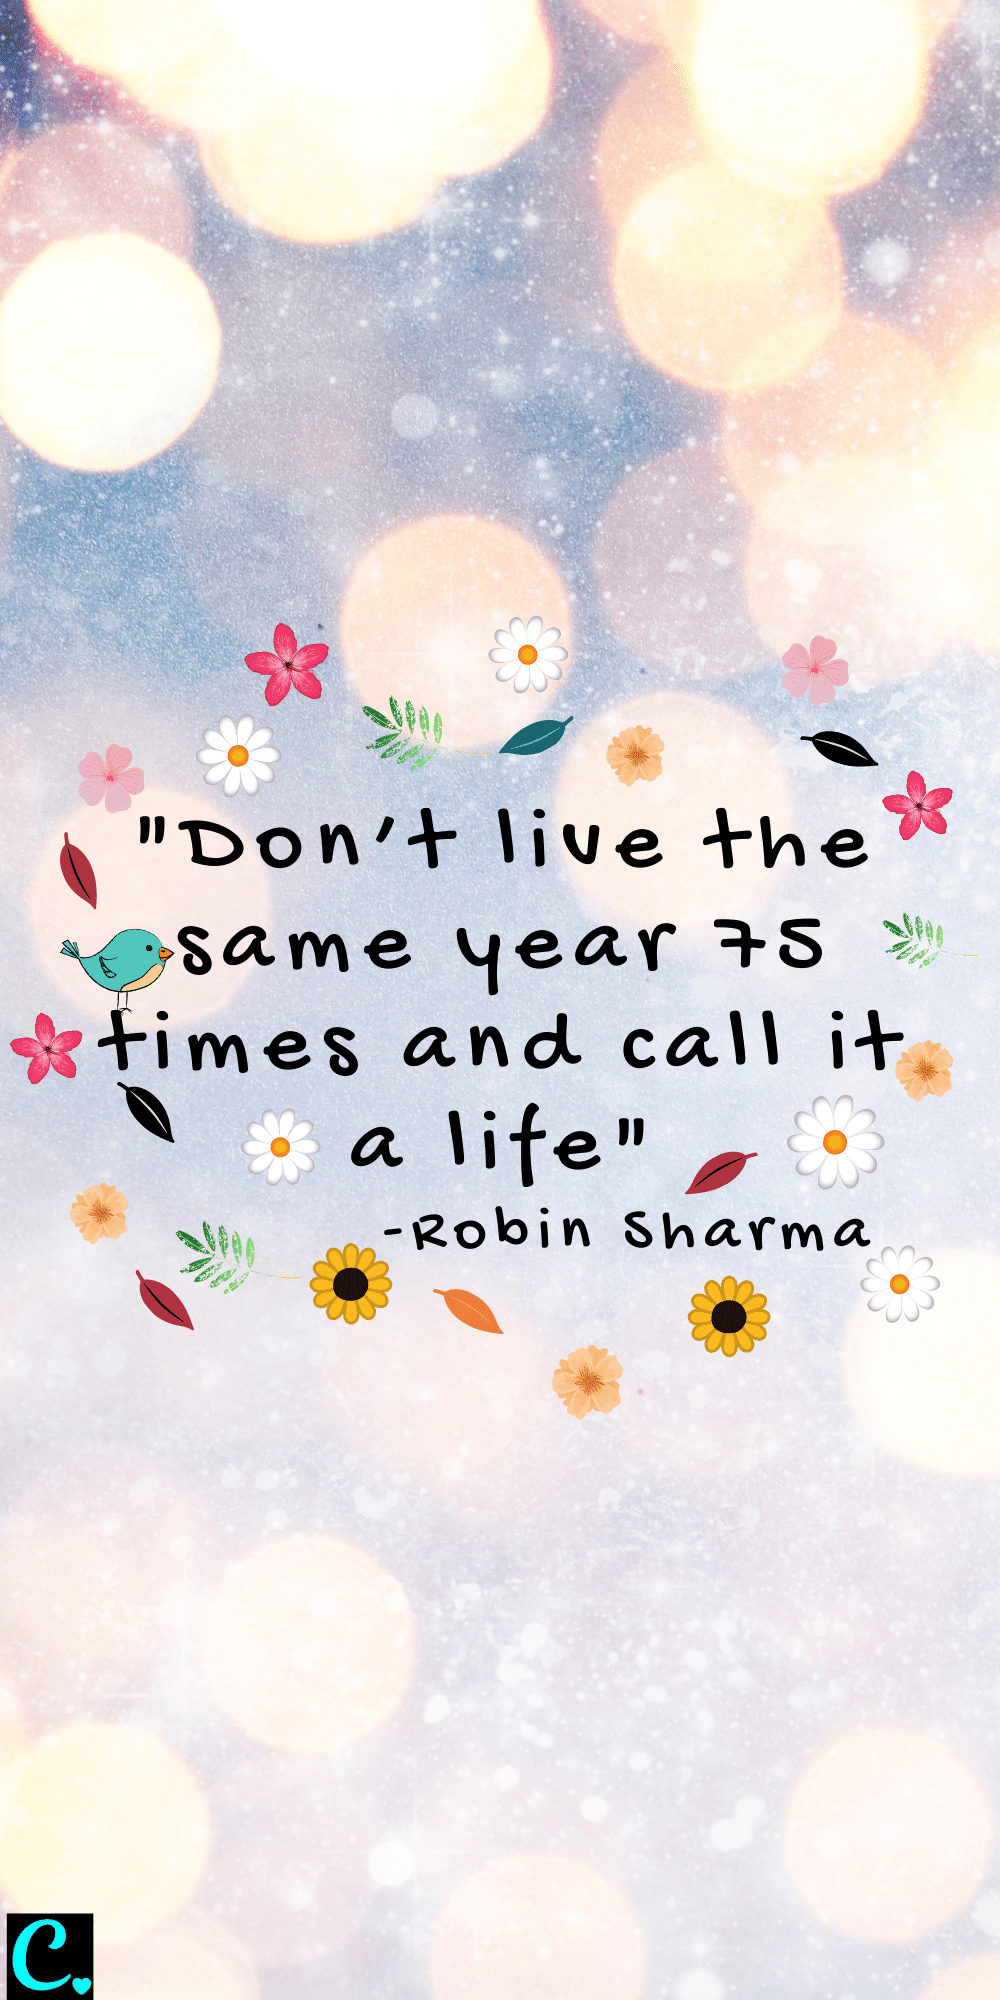 "Don’t live the same year 75 times and call it a life" - Robin Sharma